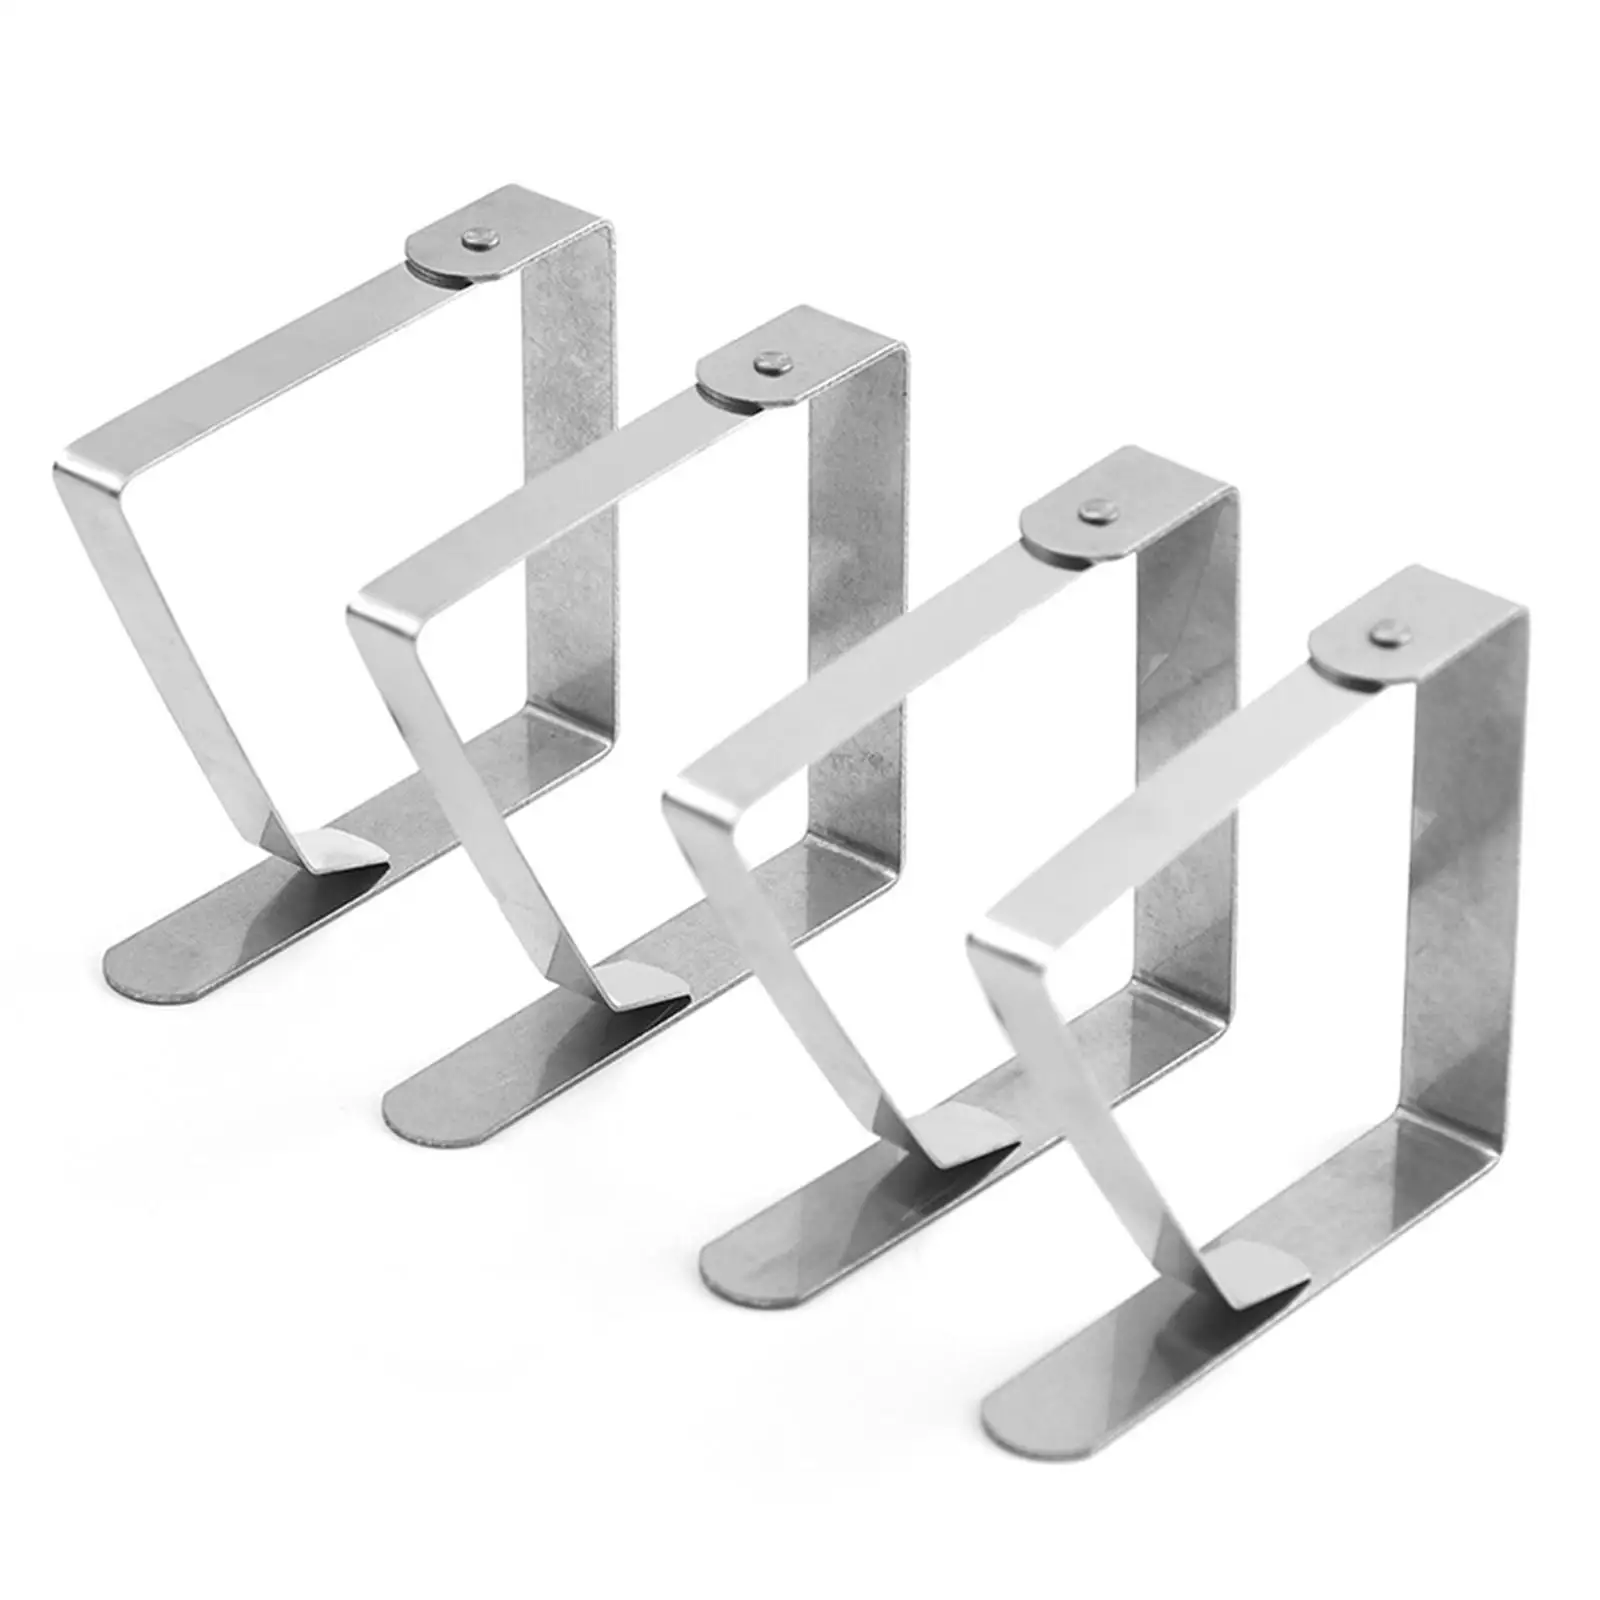 10 Pieces Tablecloth Clips Picnic Table Cloth Cover Clamps Holder Stainless Steel for Wedding Restaurant Party Camping Patios